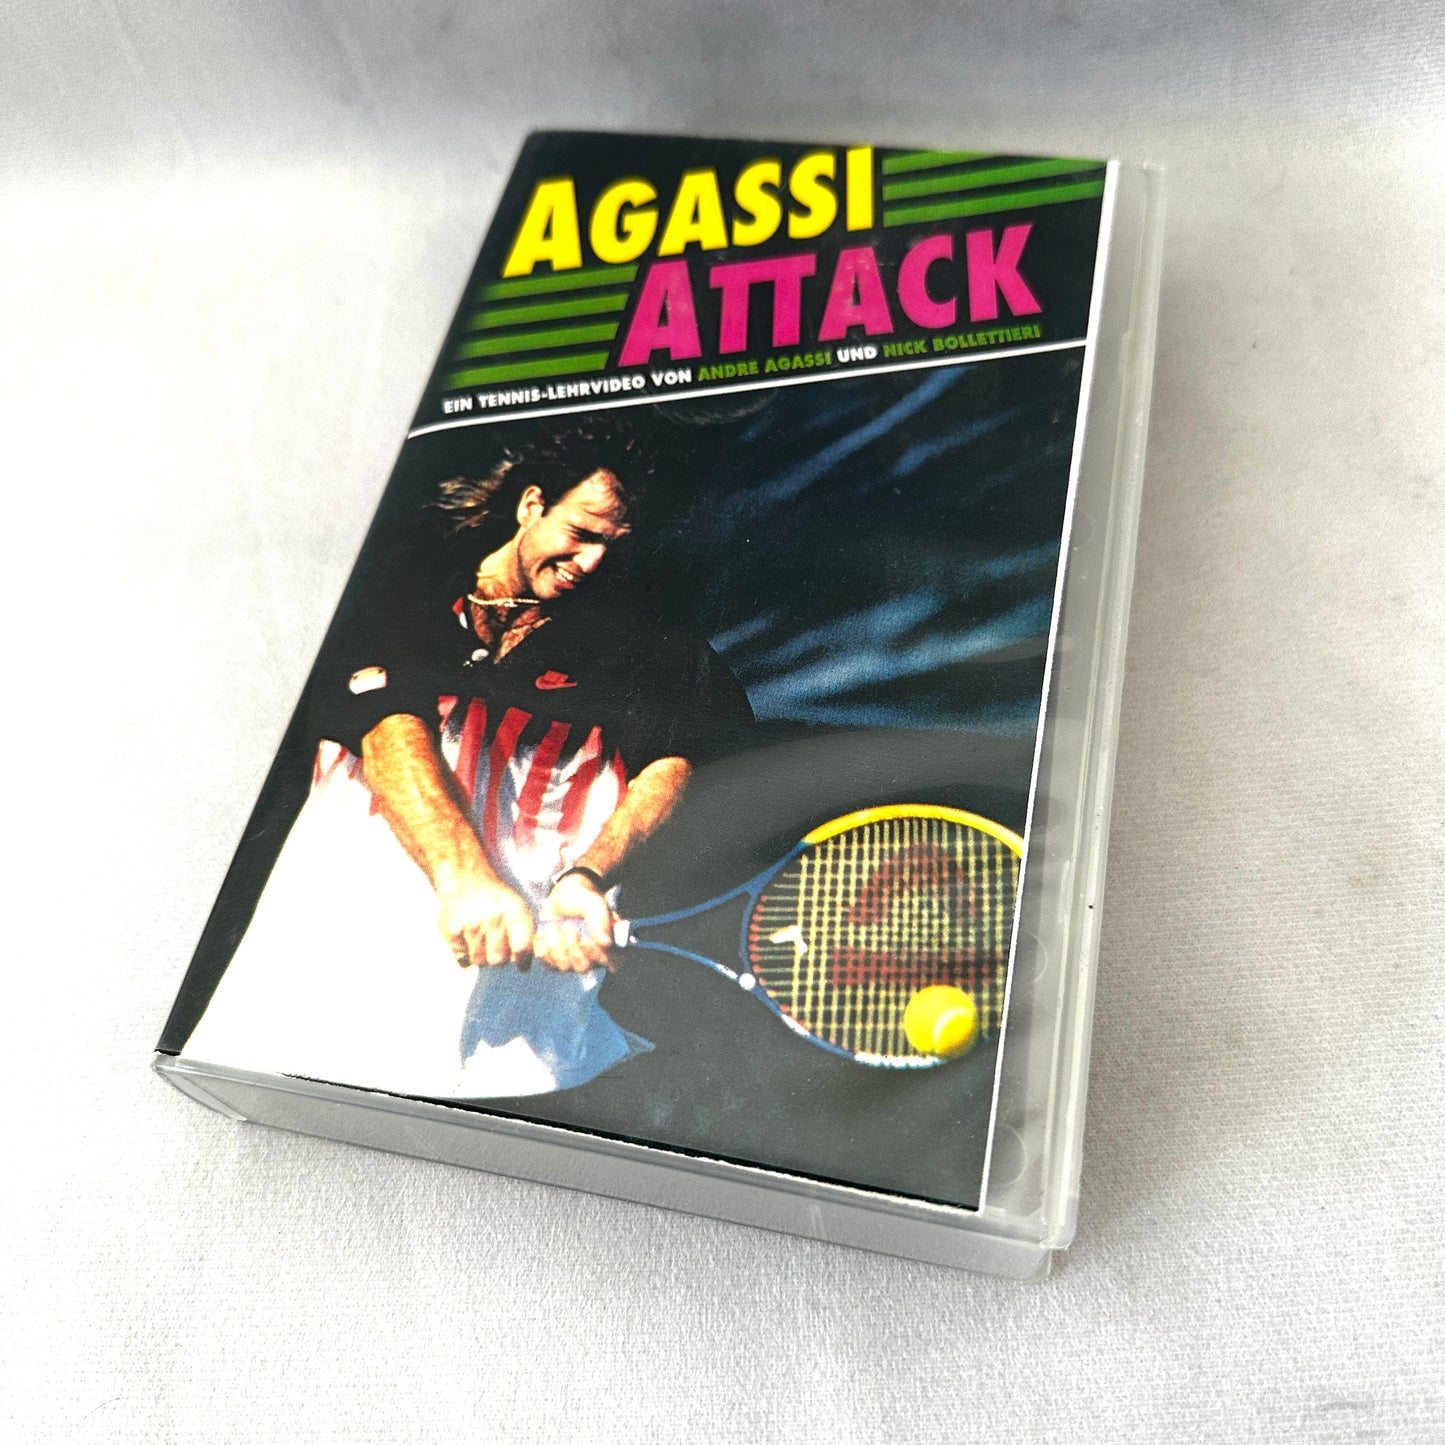 Andre Agassi Attack Nick Bollettieri Tennis Training VHS Video Tape 1992